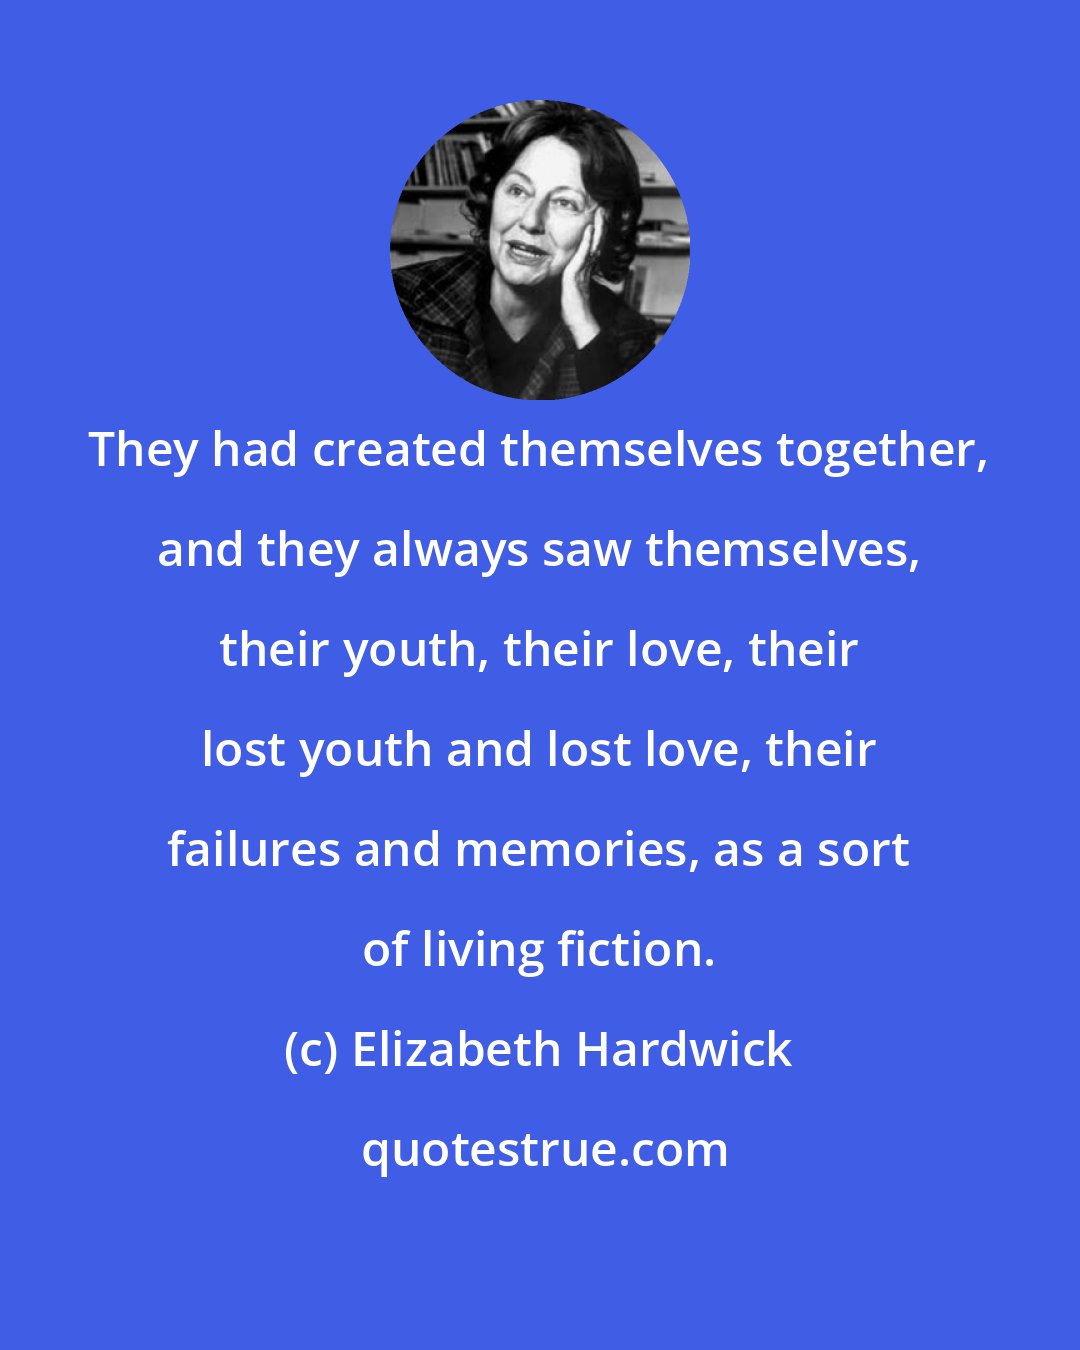 Elizabeth Hardwick: They had created themselves together, and they always saw themselves, their youth, their love, their lost youth and lost love, their failures and memories, as a sort of living fiction.